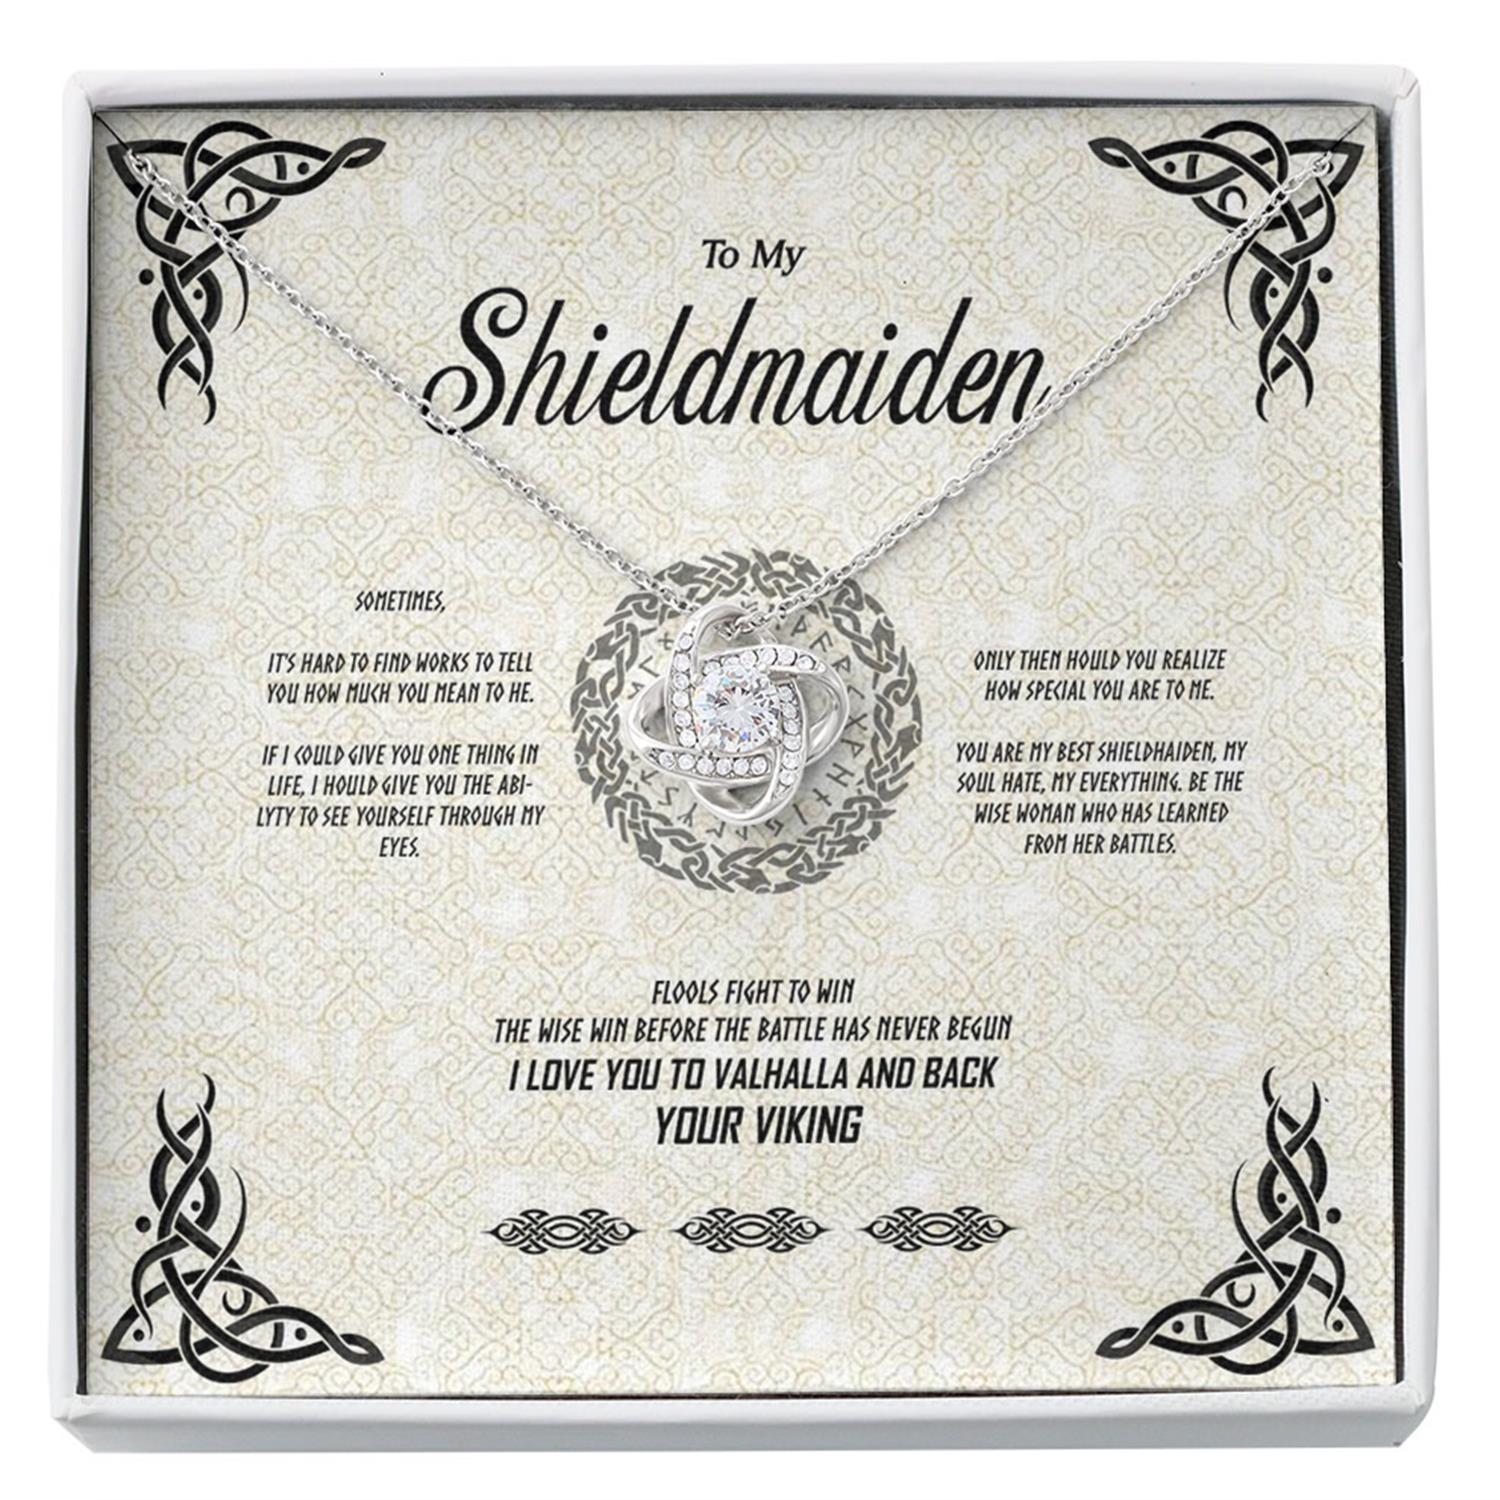 Girlfriend Necklace, Wife Necklace, To My Shieldmaiden Necklace Gift - Love, Your Viking , Girlfriend, Fiance, Future Wife Custom Necklace